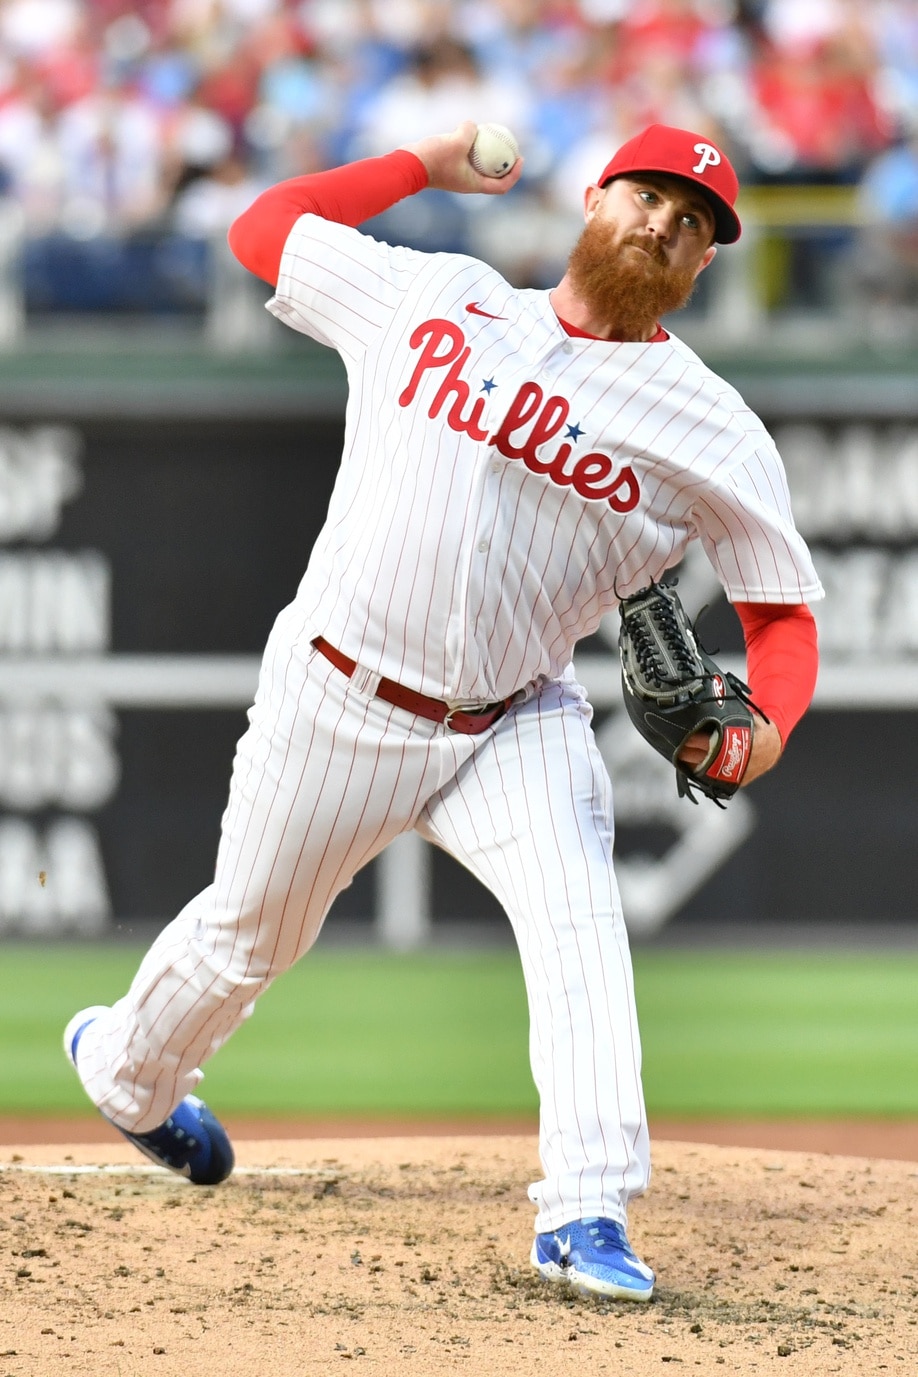 Why Can’t the Phillies Keep Momentum After they Score Runs?